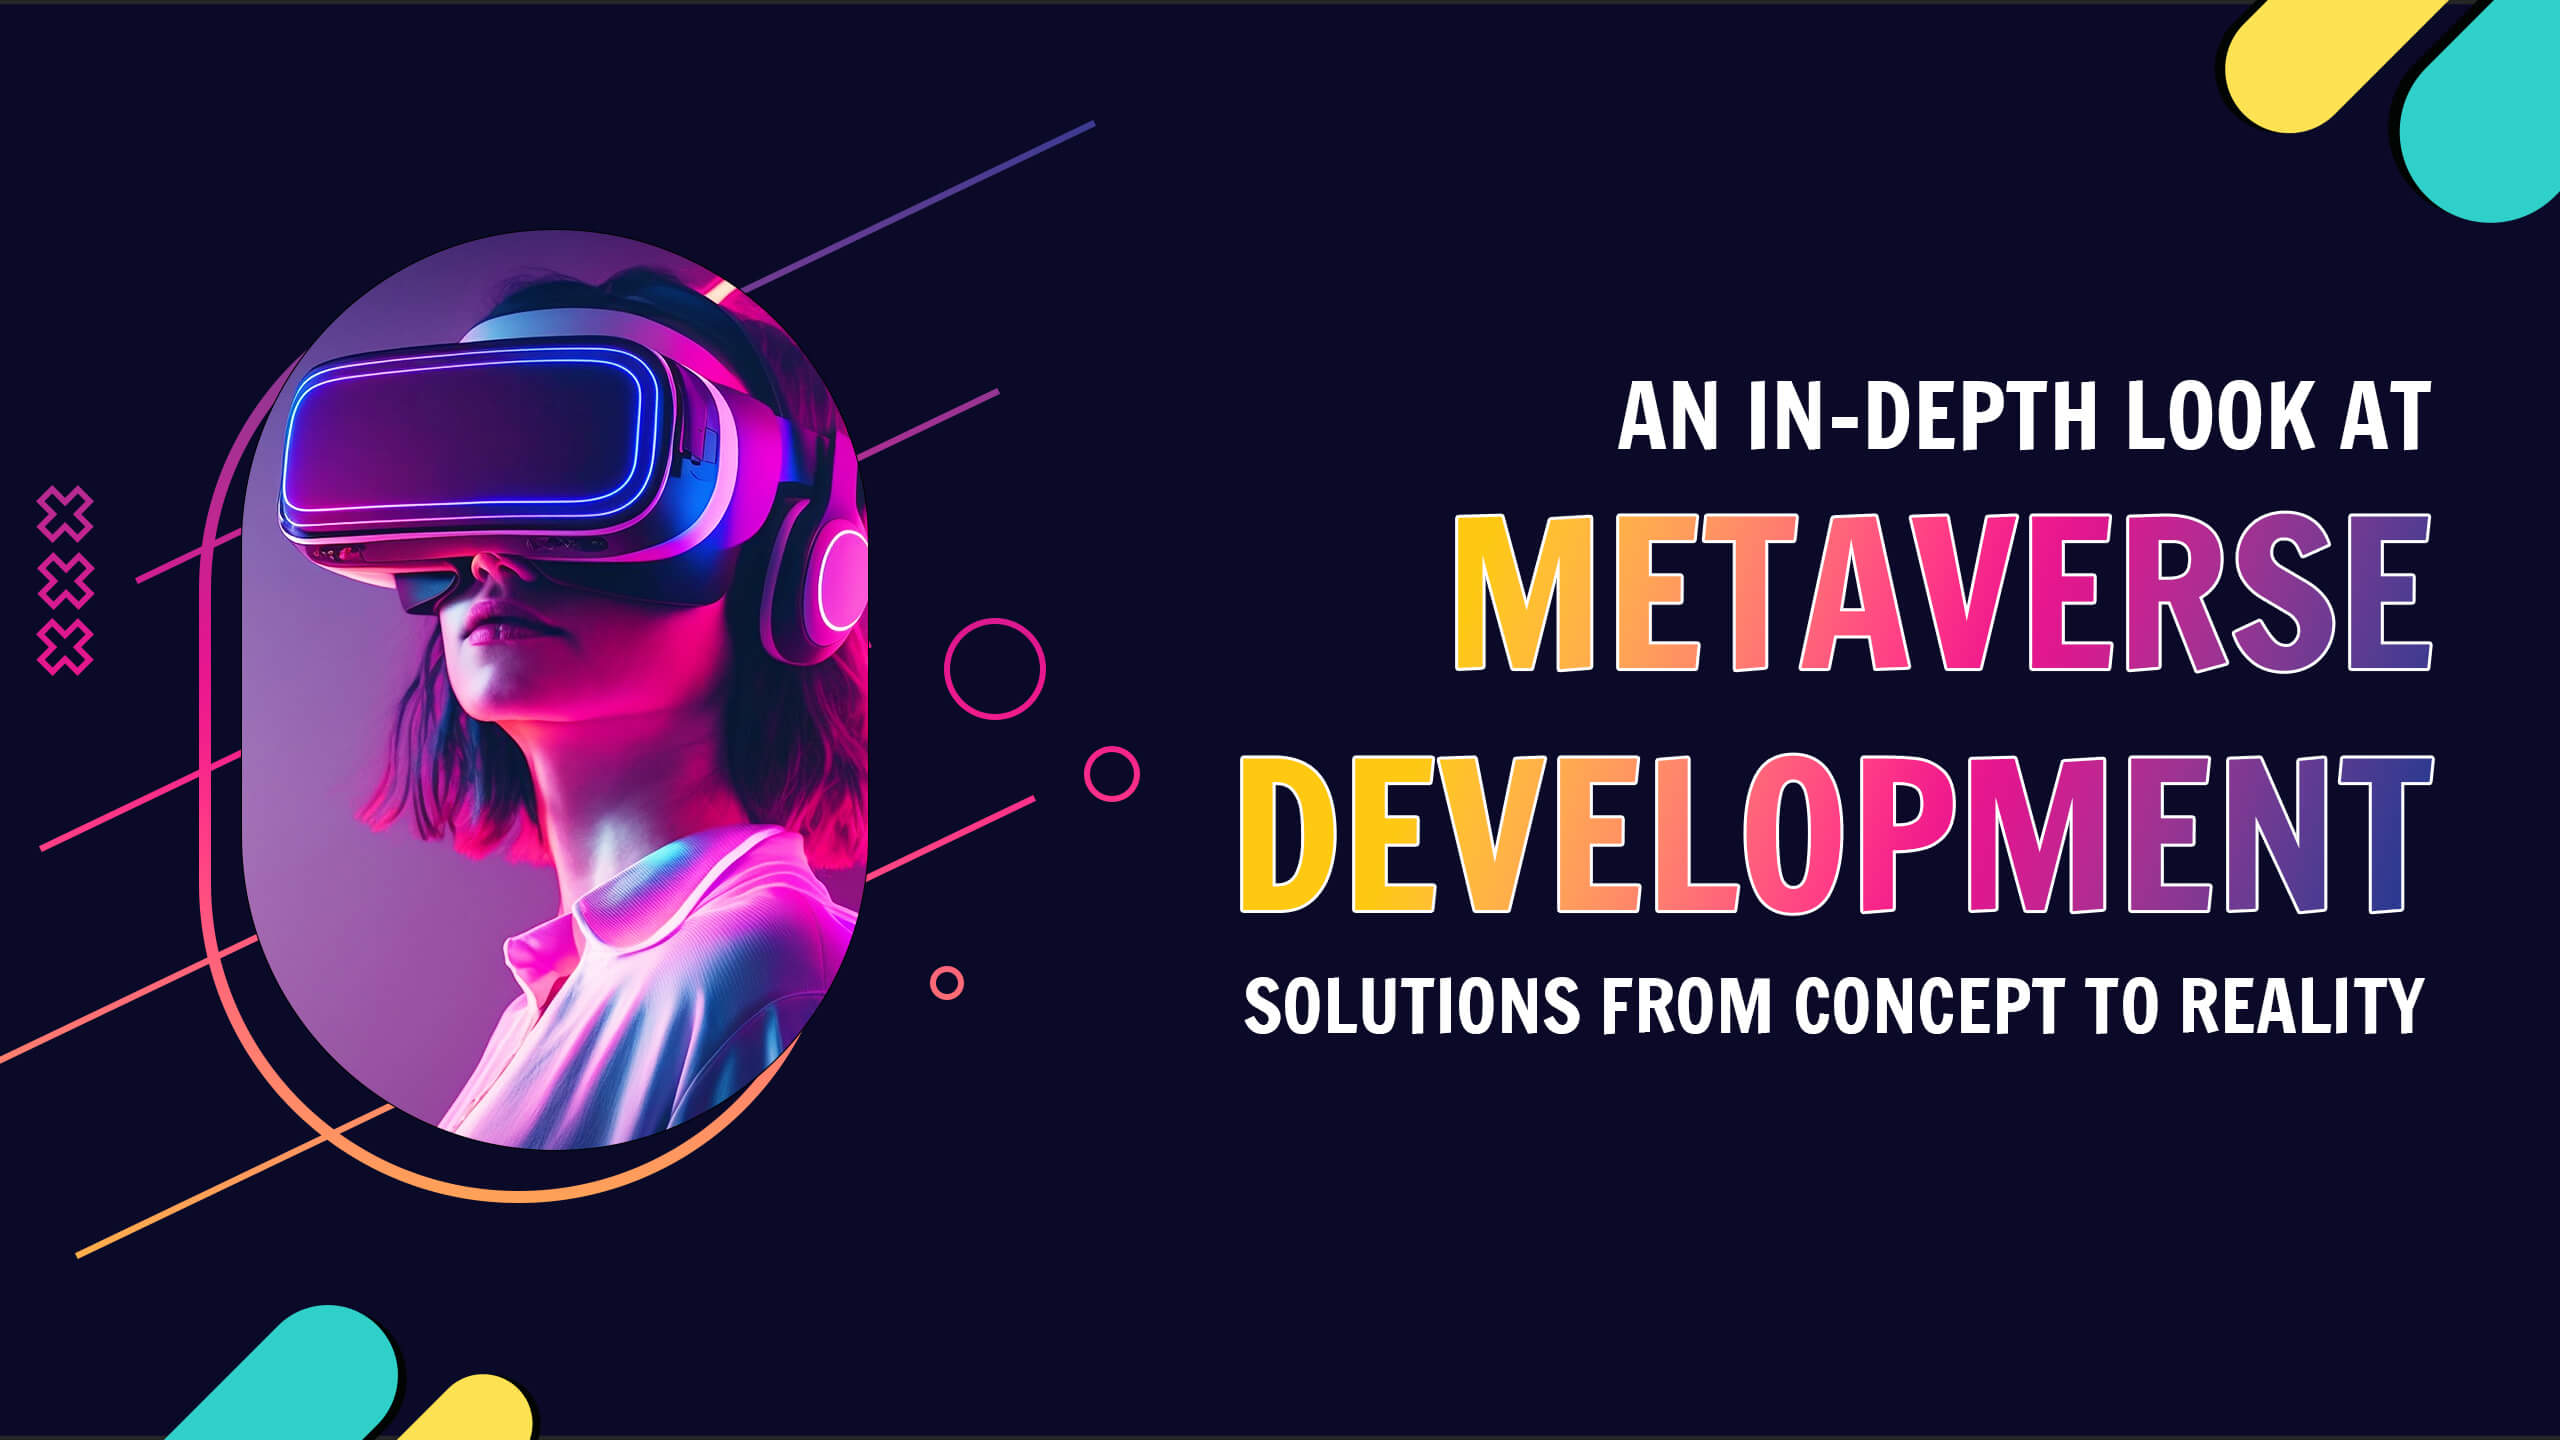 Metaverse Development Solutions From Concept to Reality